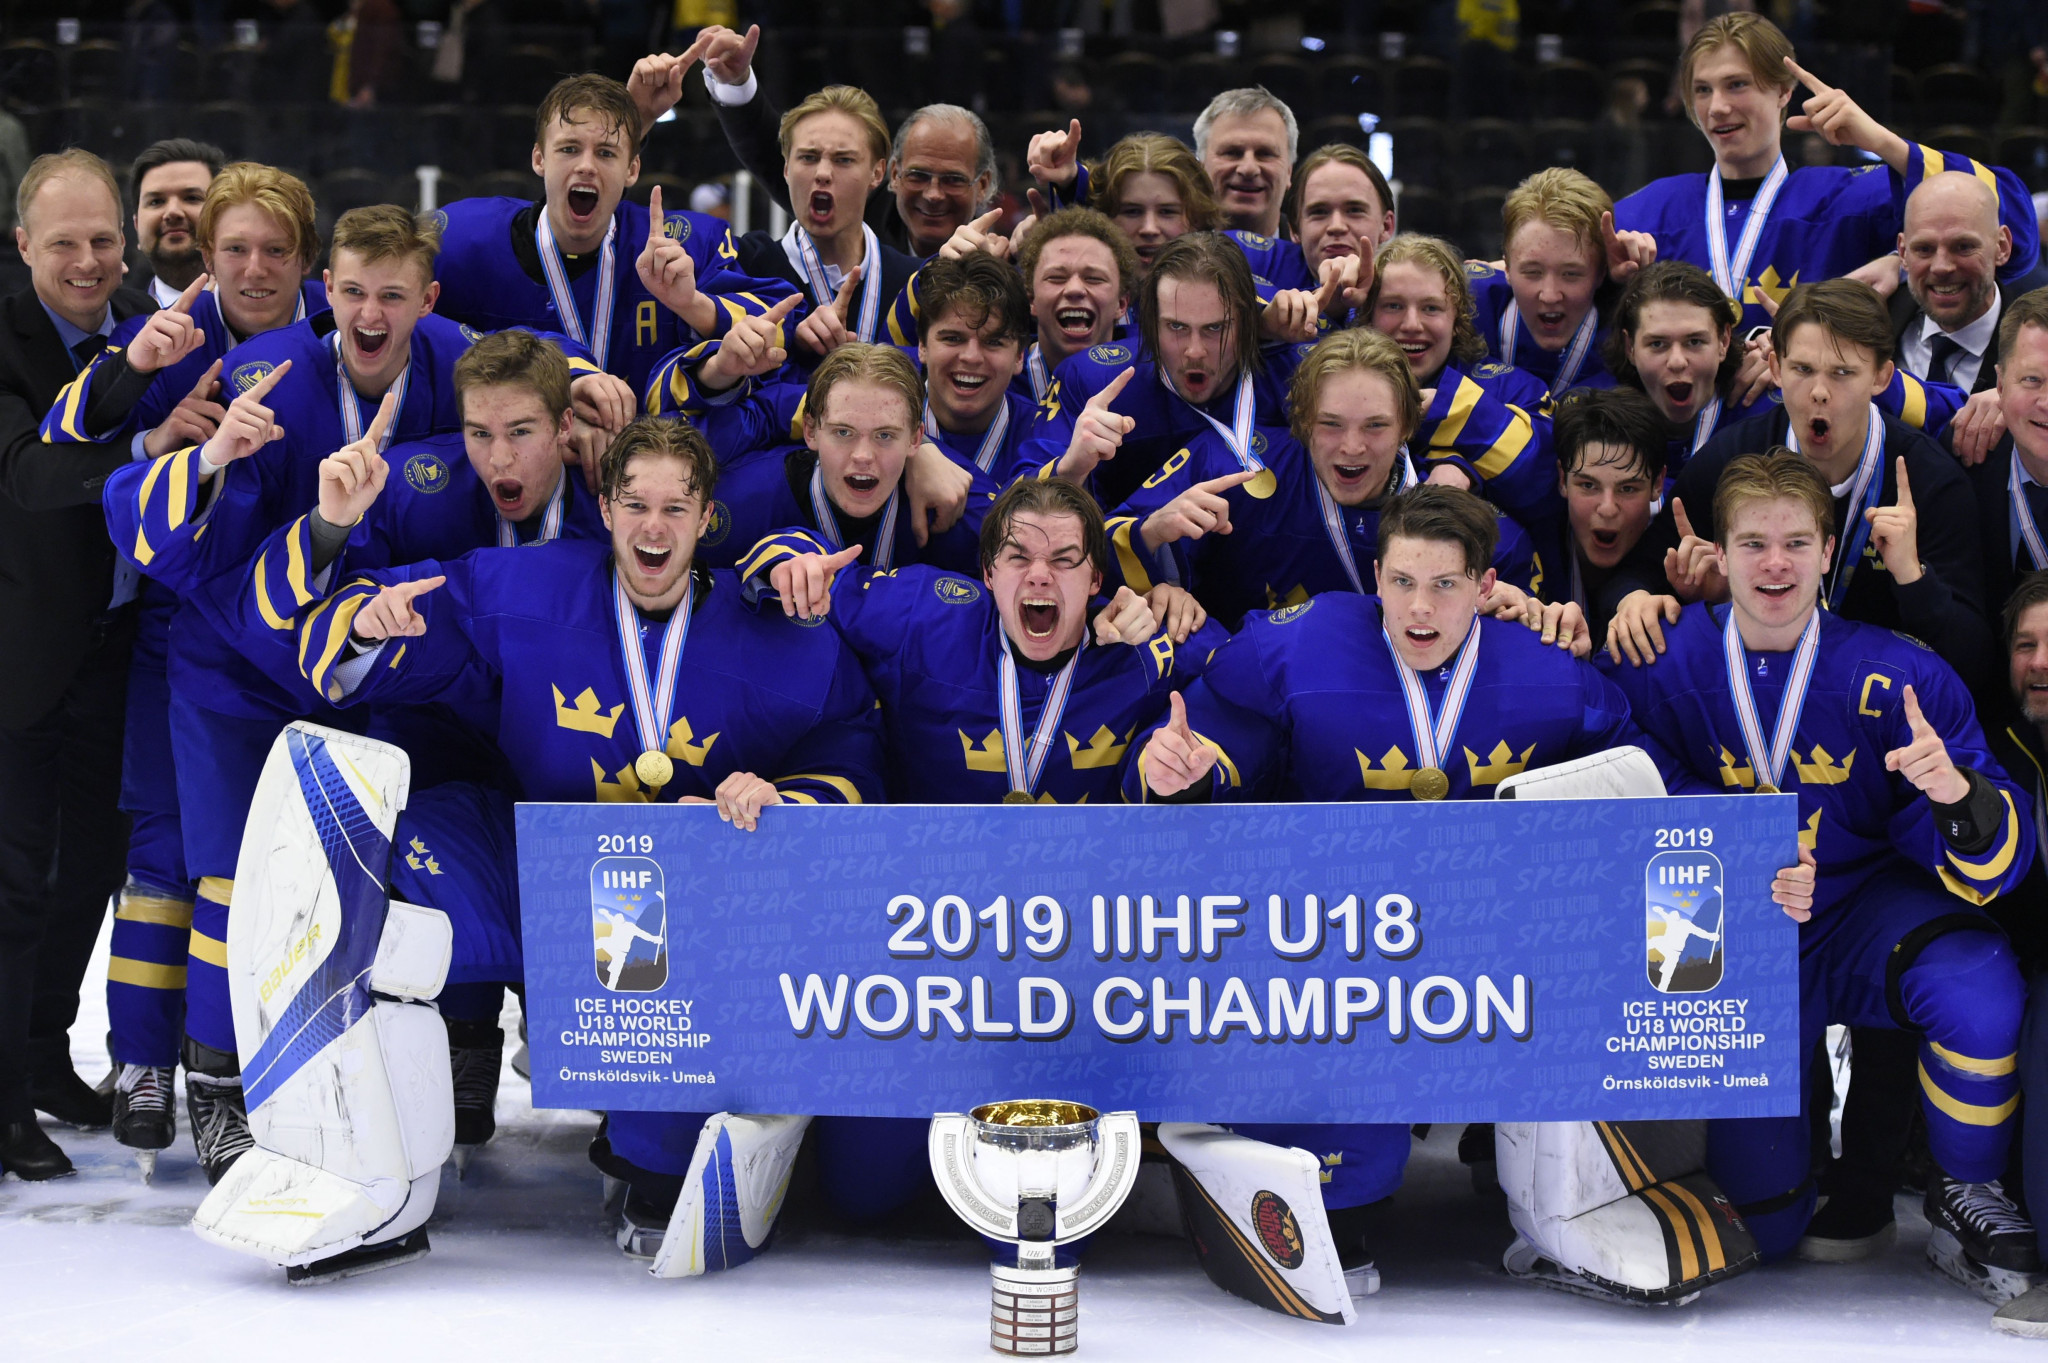 Hosts Sweden were crowned last year's champions ©Getty Images